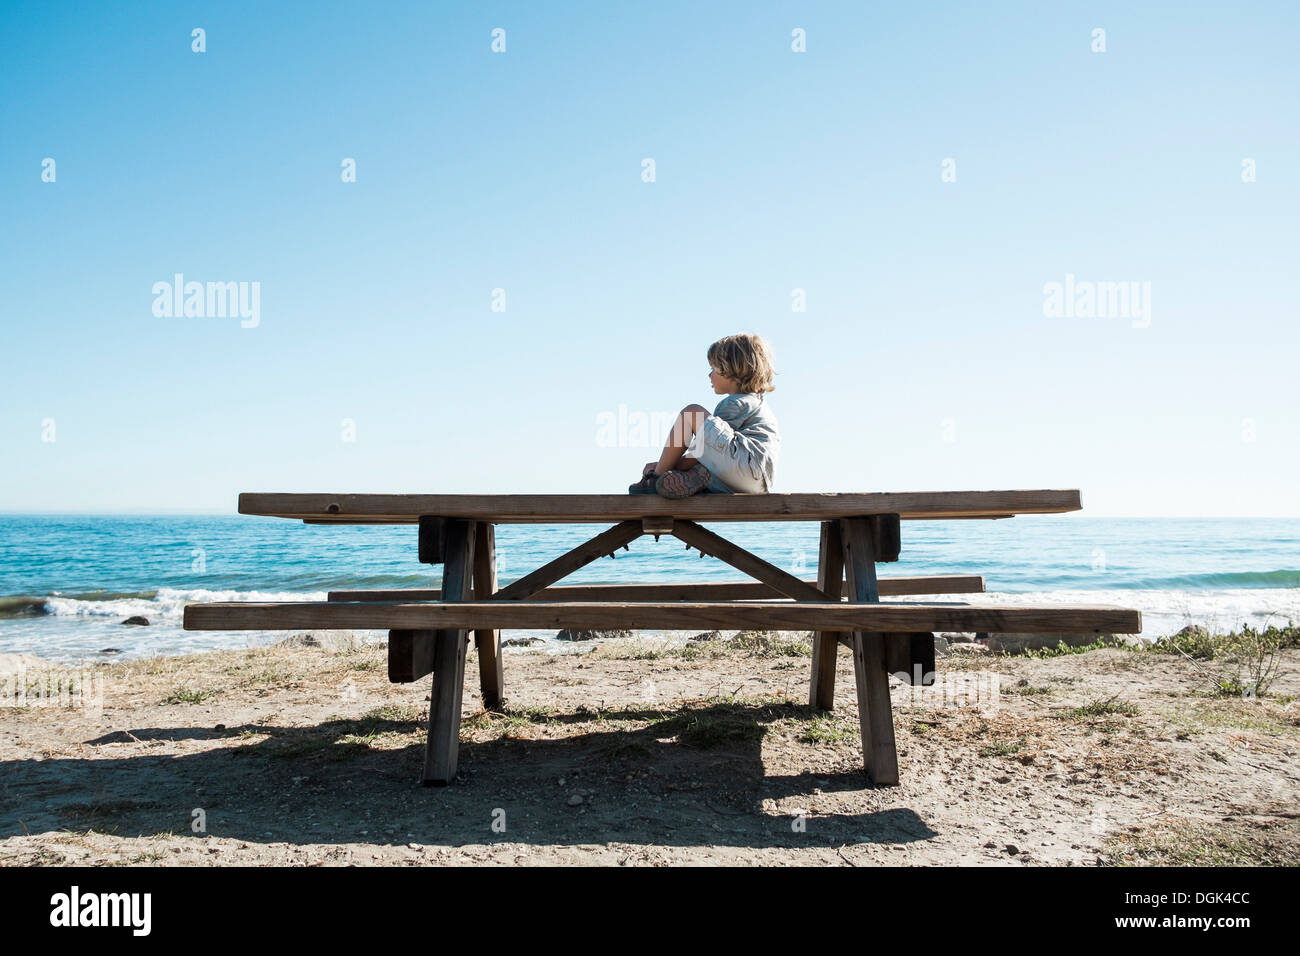 Boy sitting on picnic table at beach Stock Photo